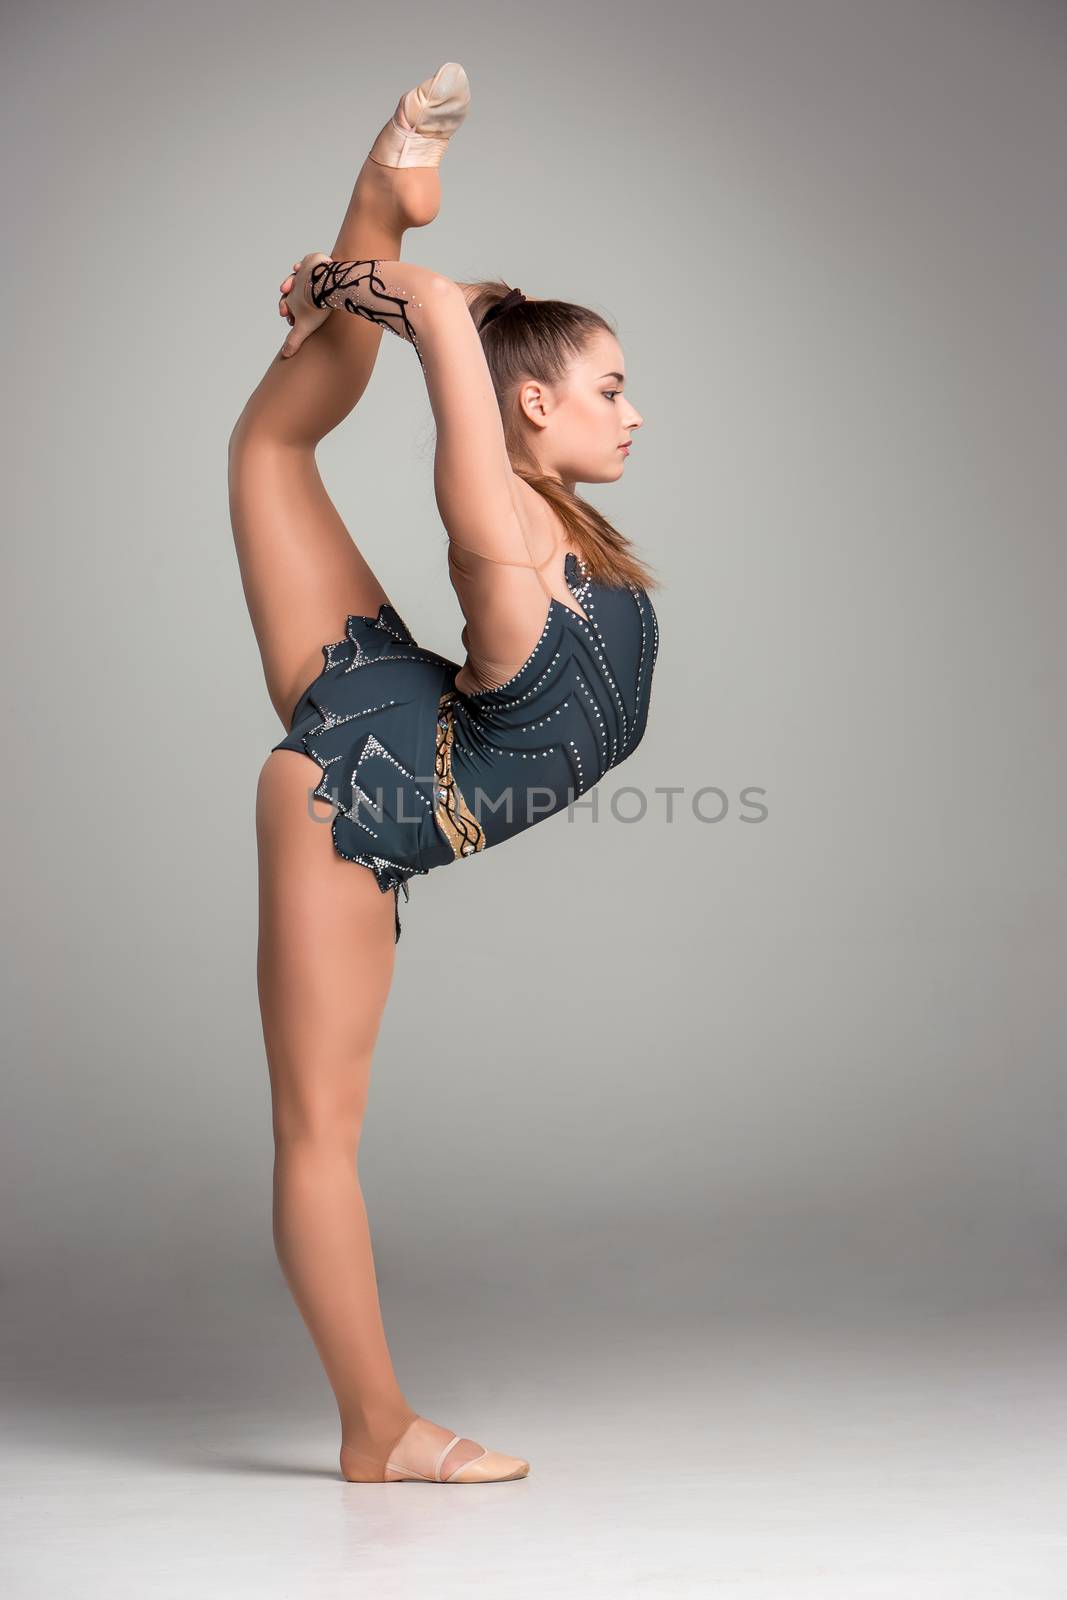 teenager doing gymnastics exercises  on a gray background